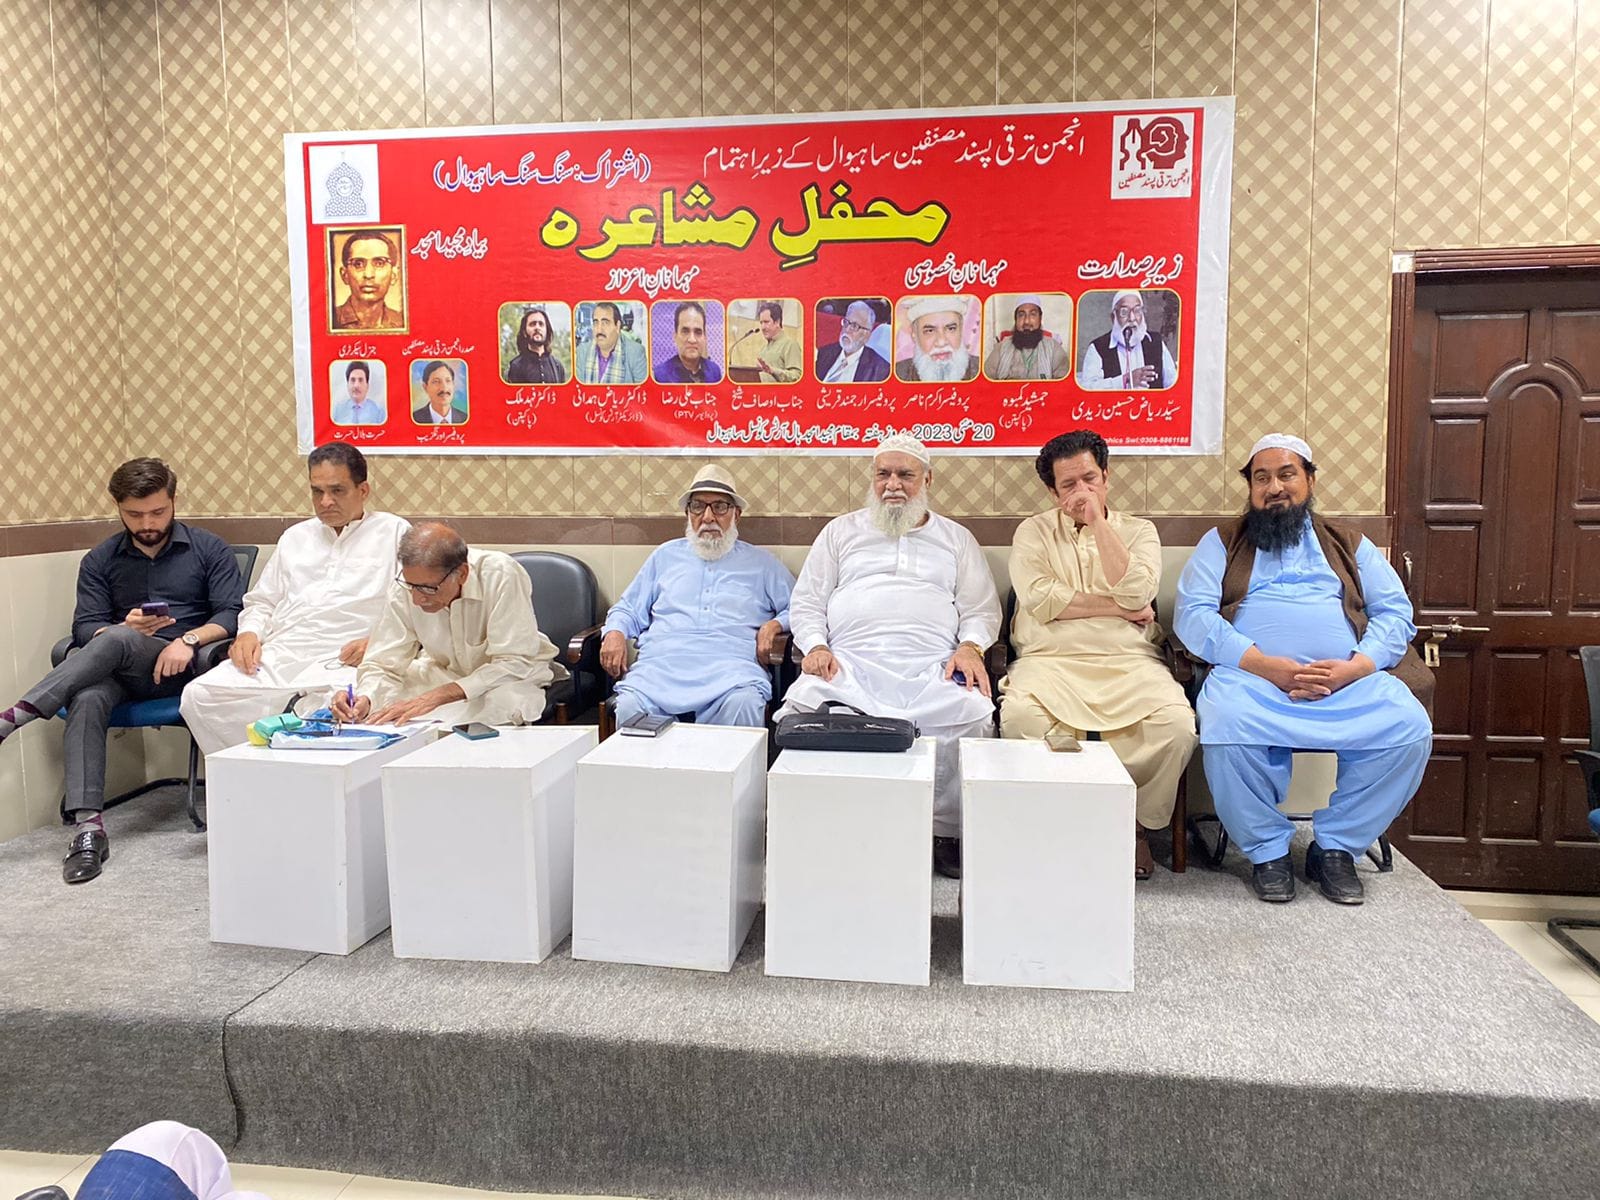 Sahiwal Poetry Symposium Draws Renowned Poets and Audience